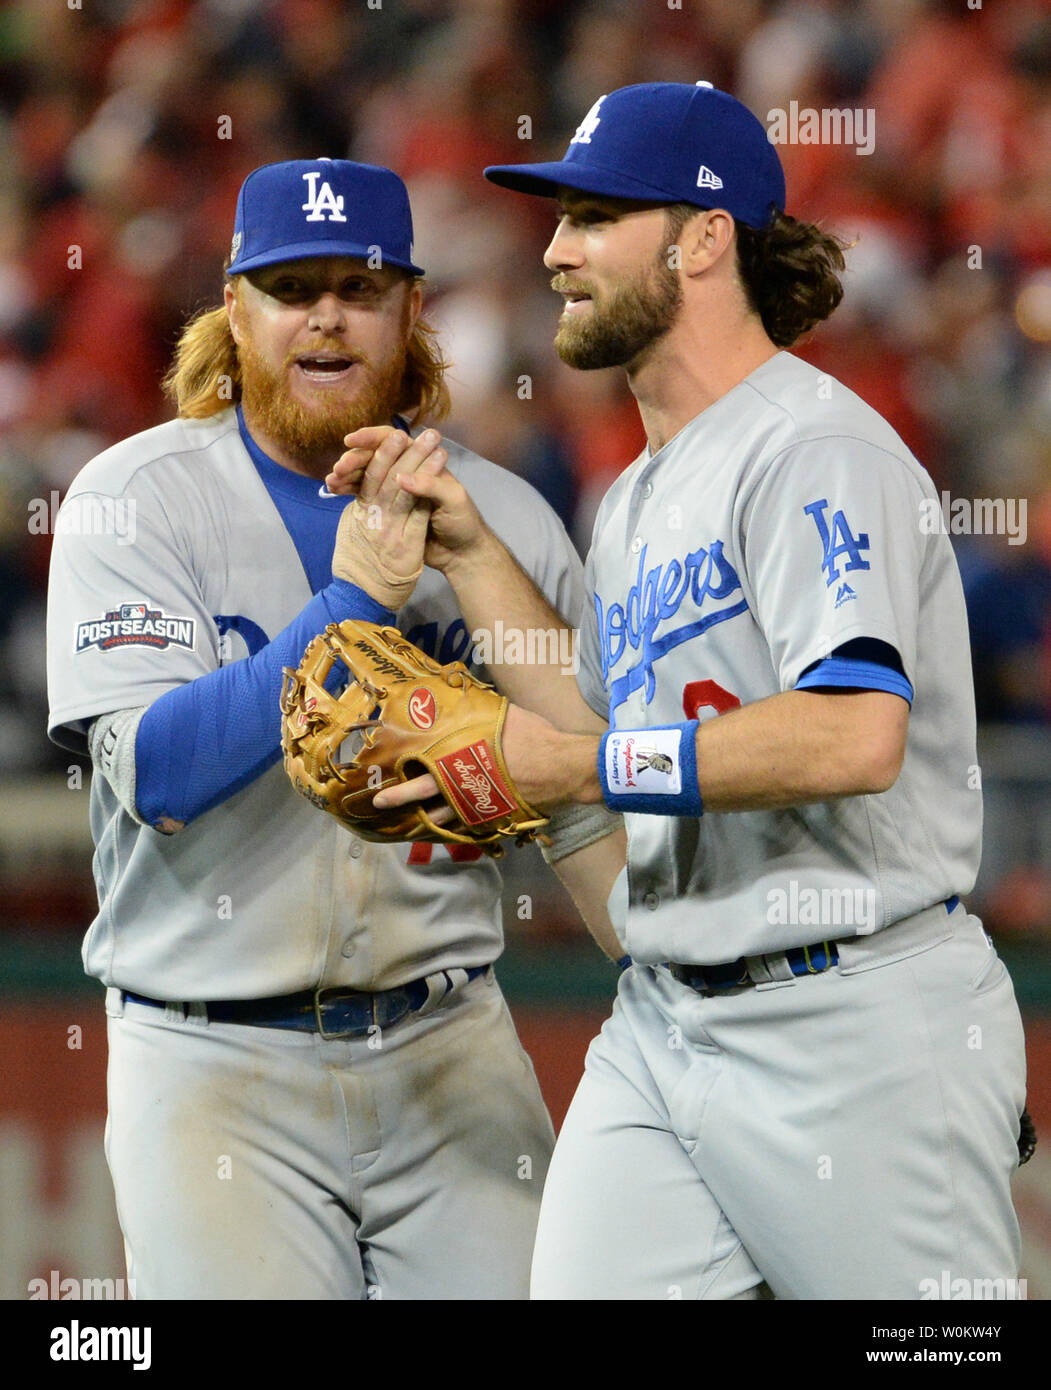 Los Angeles Dodgers' Justin Turner (L), who had a 2-RBI homer, and Charlie  Culberson celebrate the 4-3 win over the Washington Nationals in game 1 of  the National League Division Series in